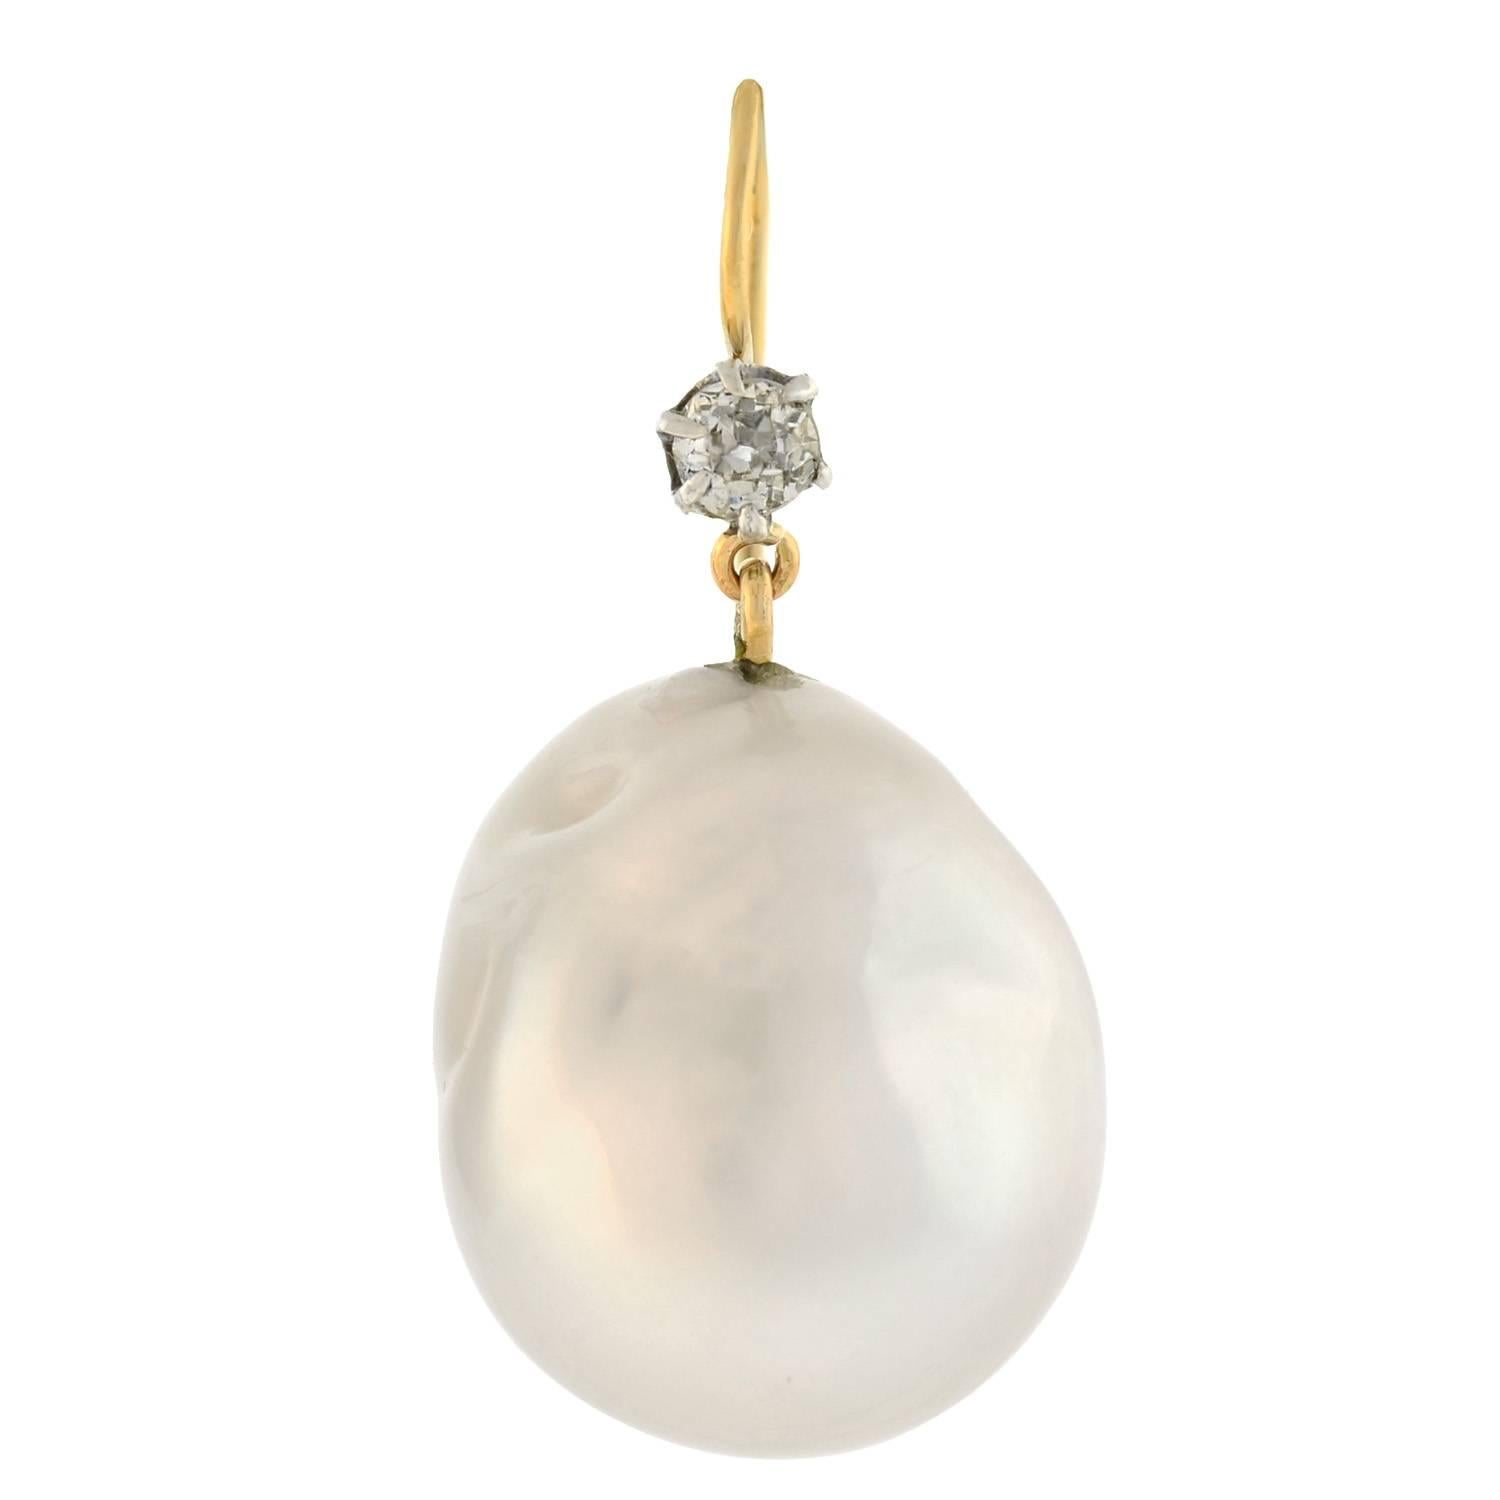 Lovely South Sea pearl earrings from the Late Victorian (ca1900) era! Each of these fabulous earrings is comprised of a single South Sea pearl which hangs from a simple diamond topper. The natural South Sea pearls are quite substantial in size, and